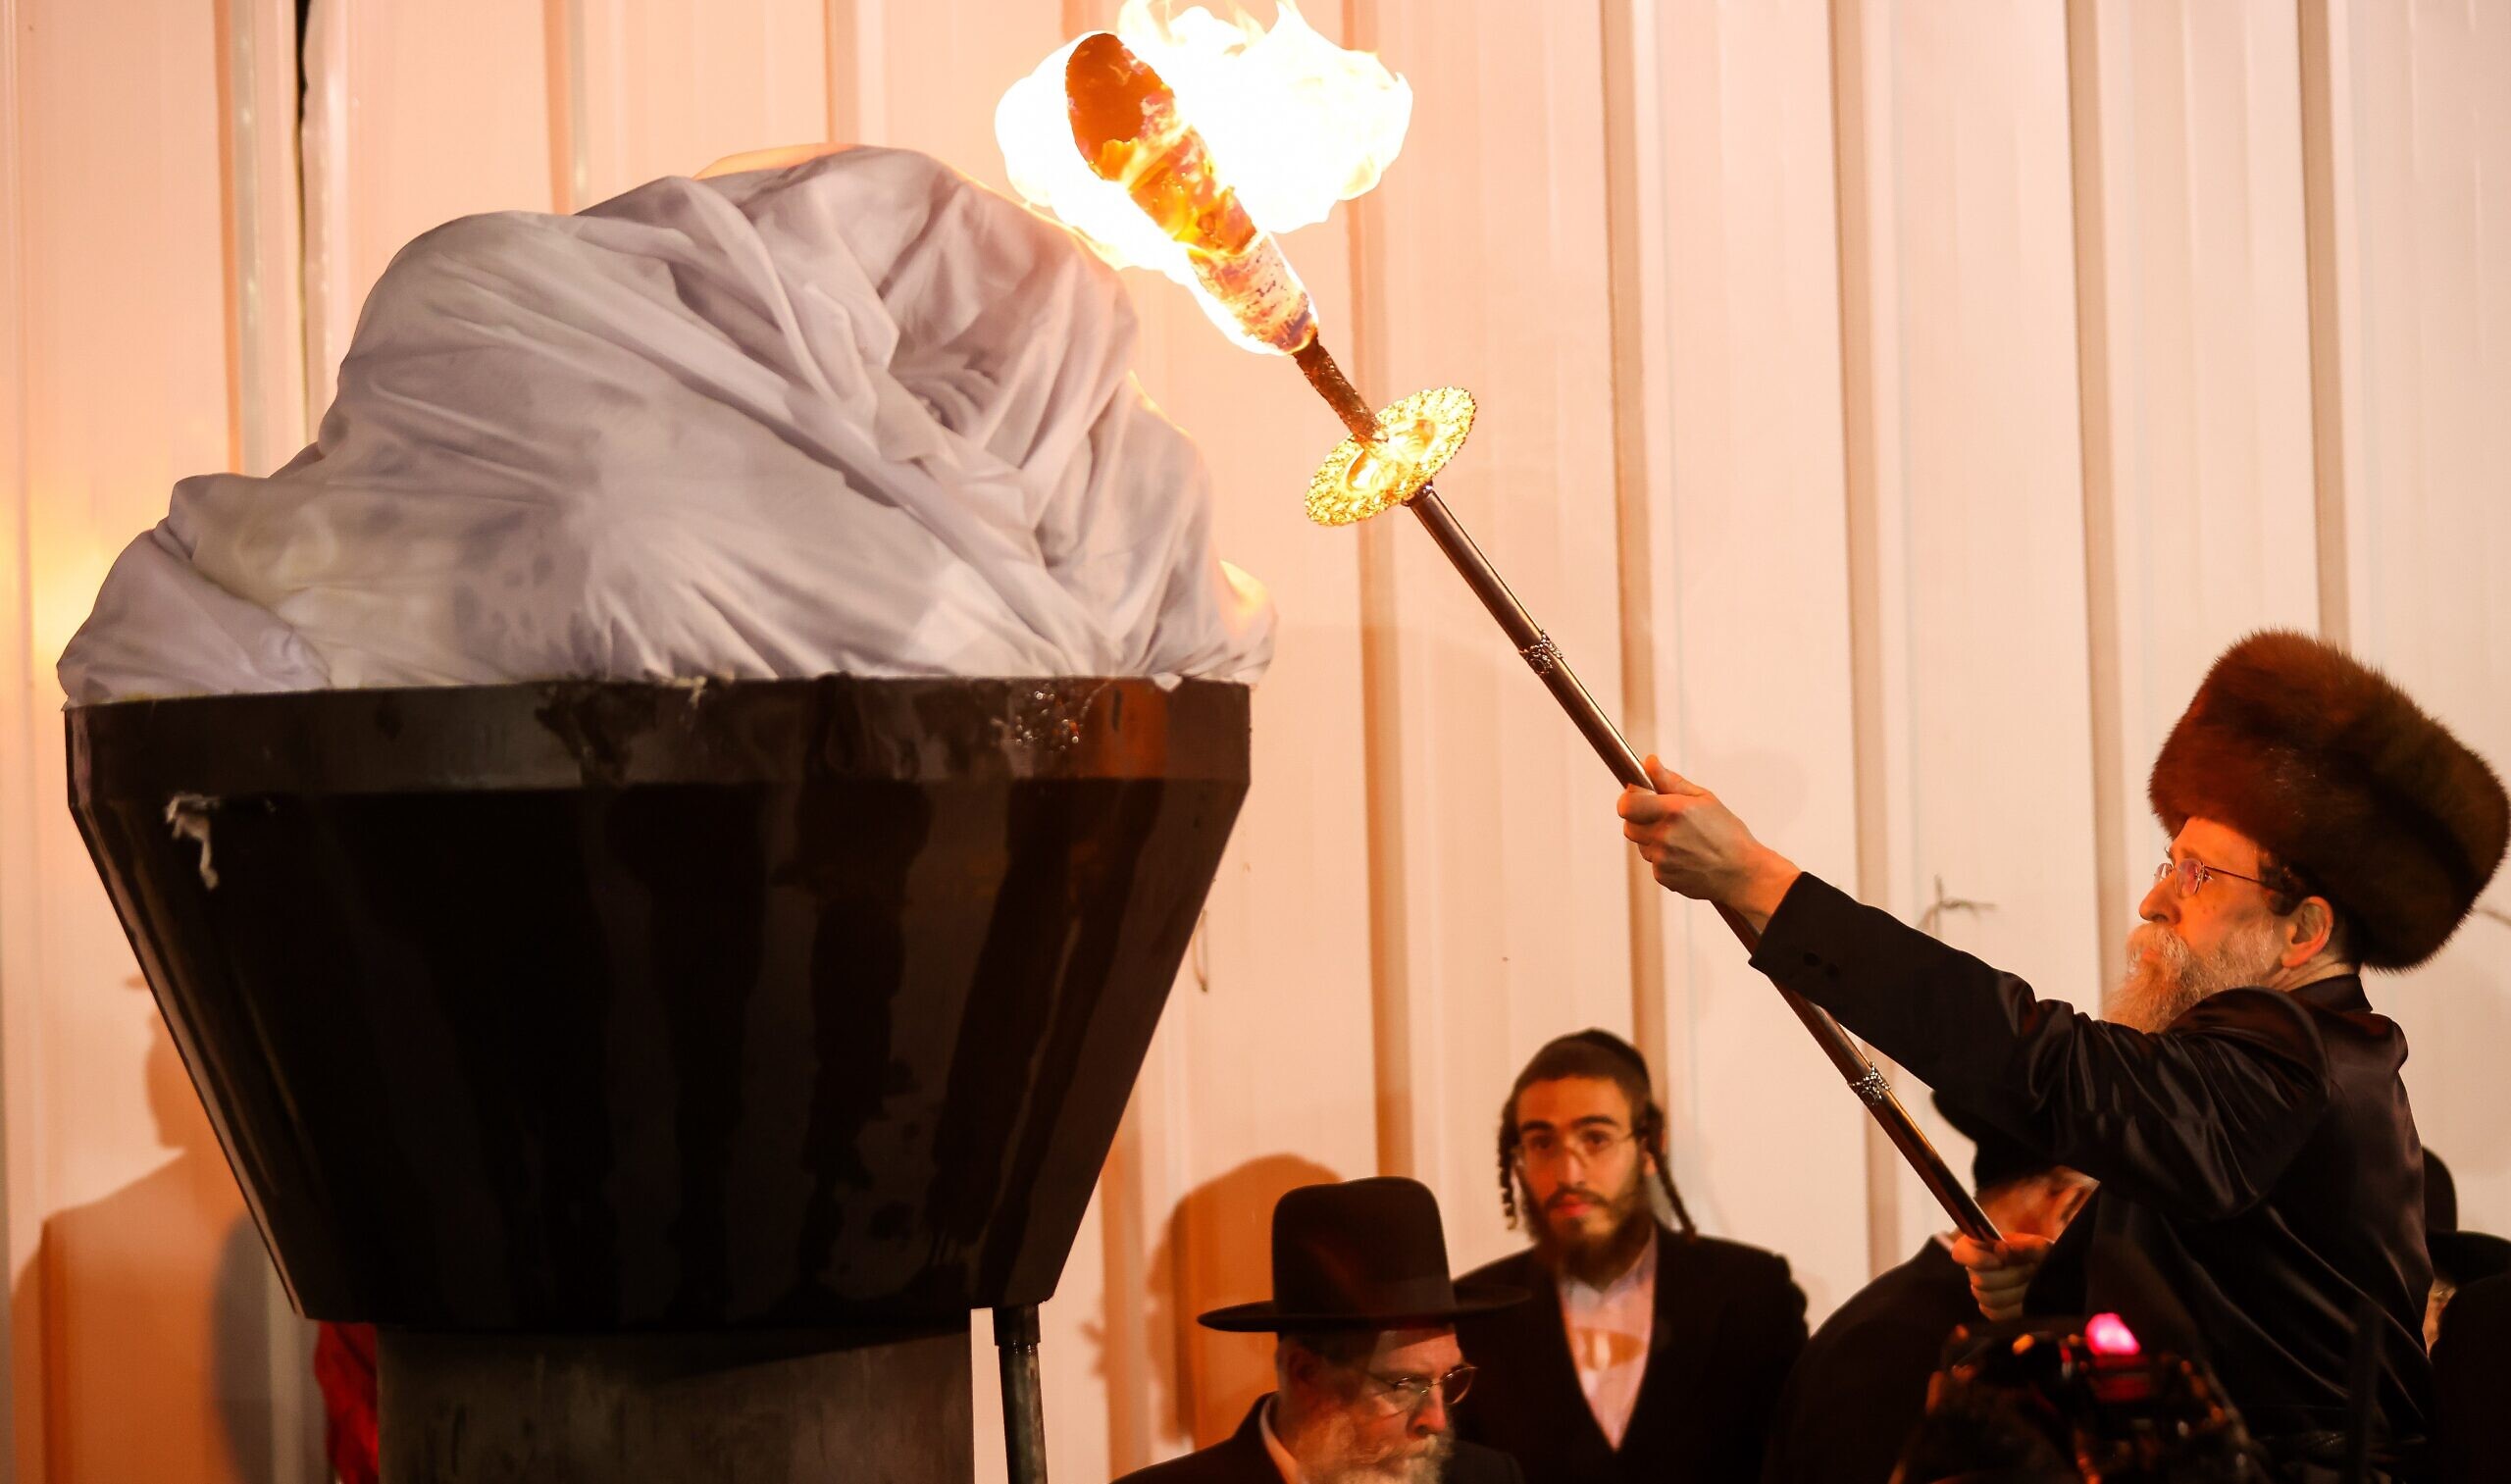 Israel celebrates Lag B’Omer with thousands in Meron amid extra